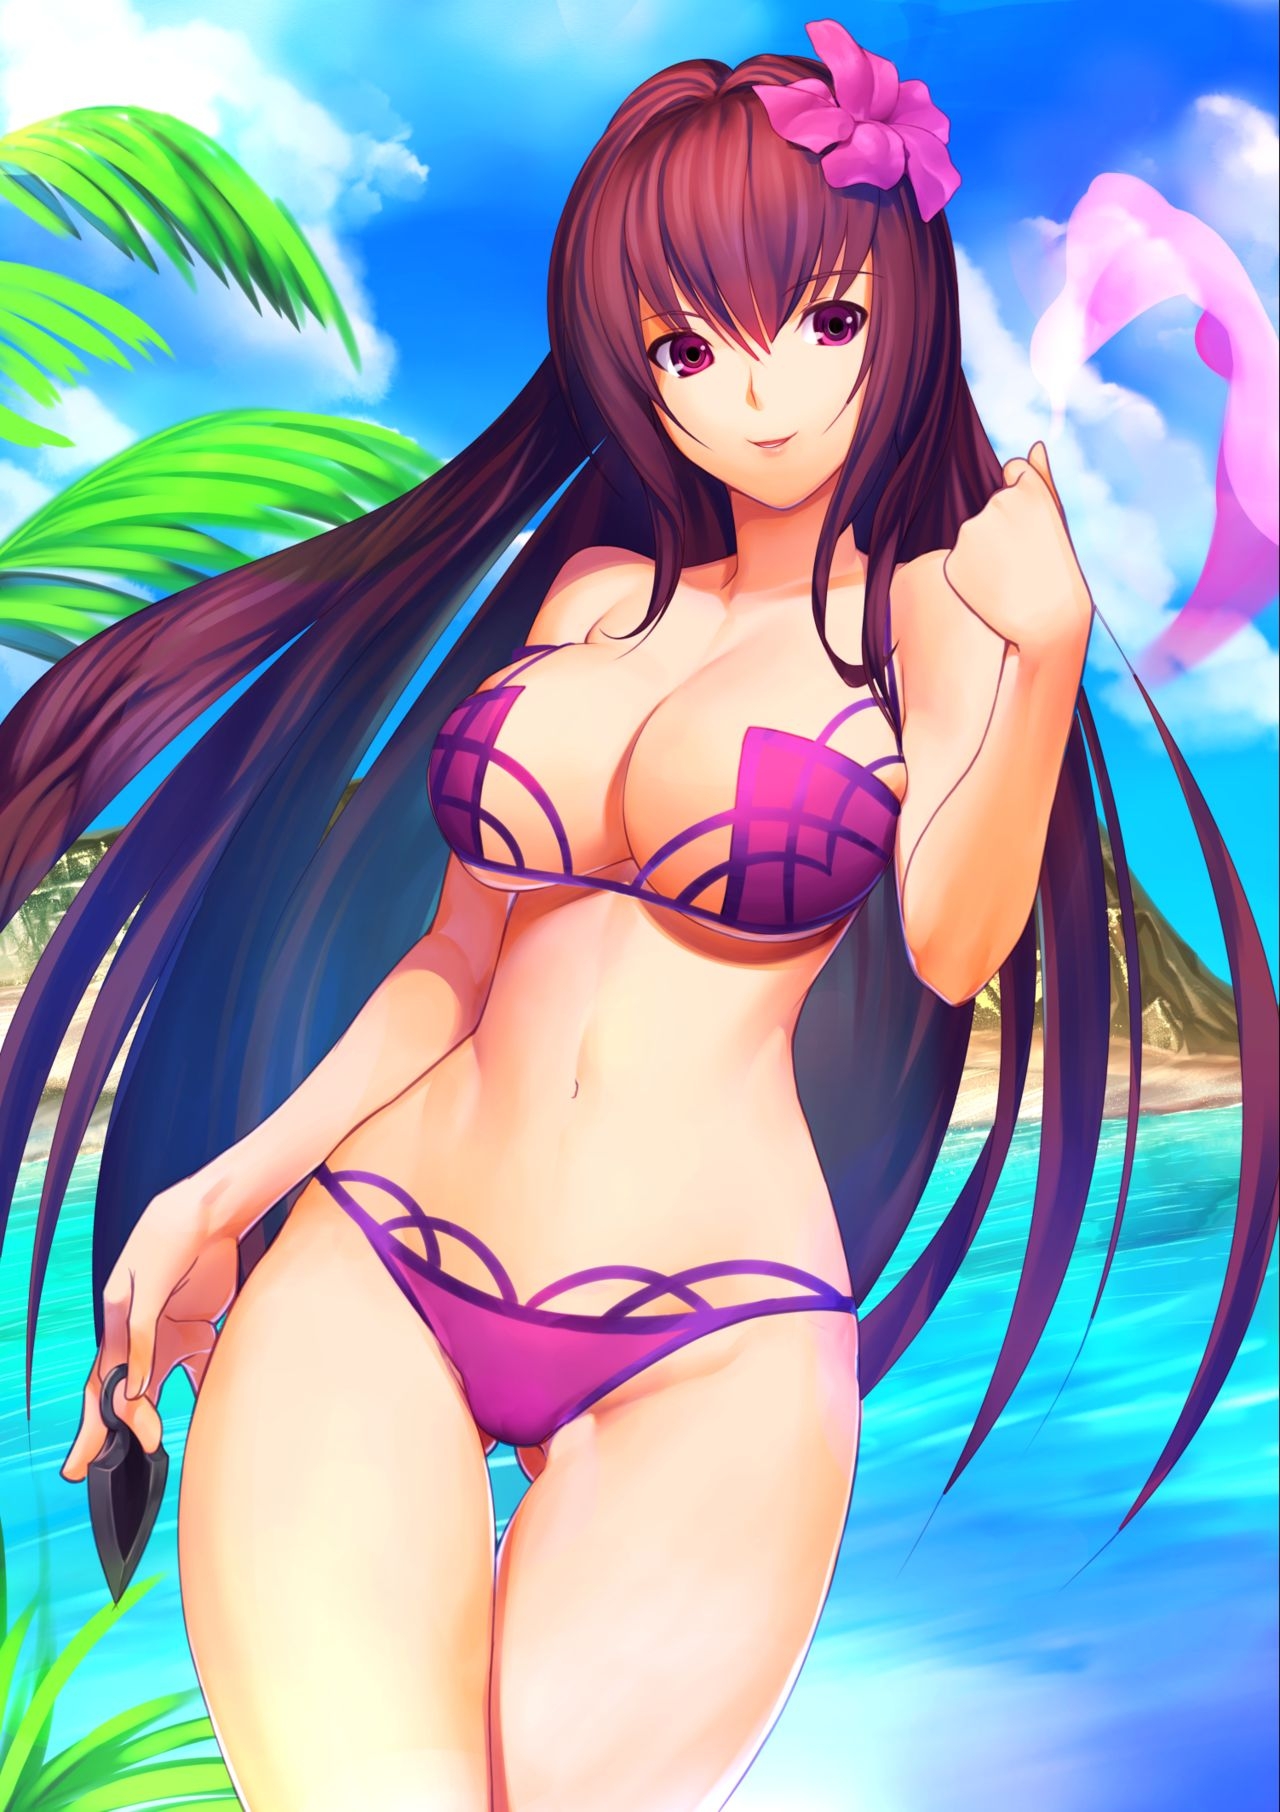 Scathach Fate/Grand Order 97